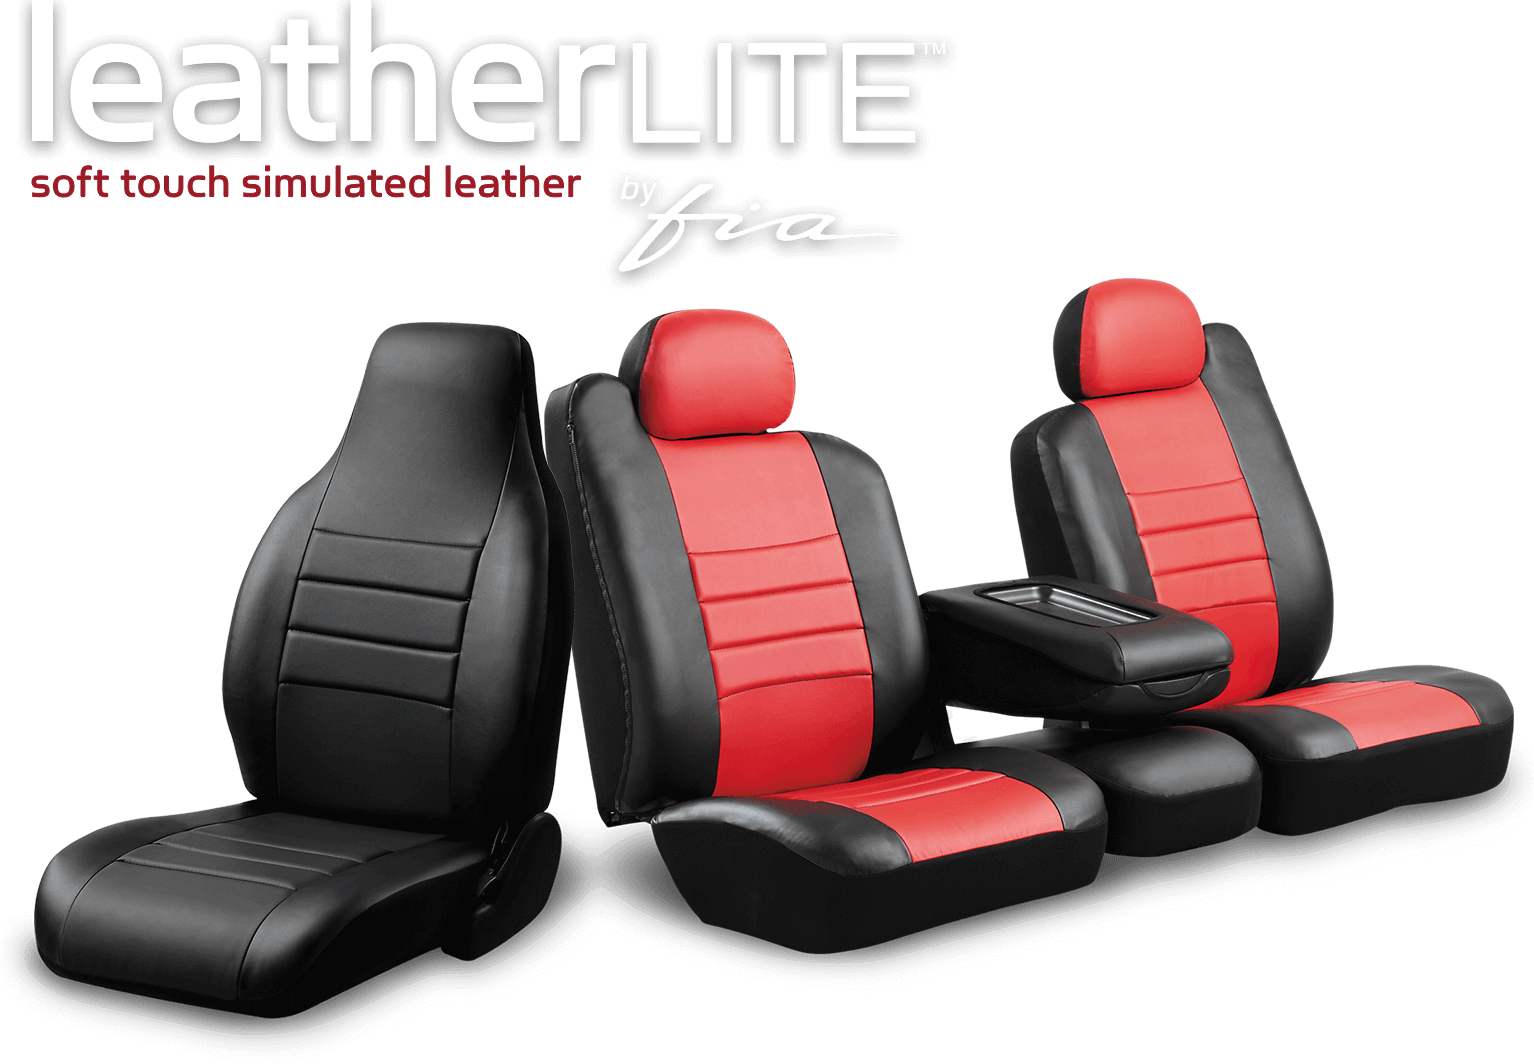 Fia SL68-14 GRAY Custom Fit Front Seat Cover Bucket Seats Black w/Gray Center Panel Leatherette